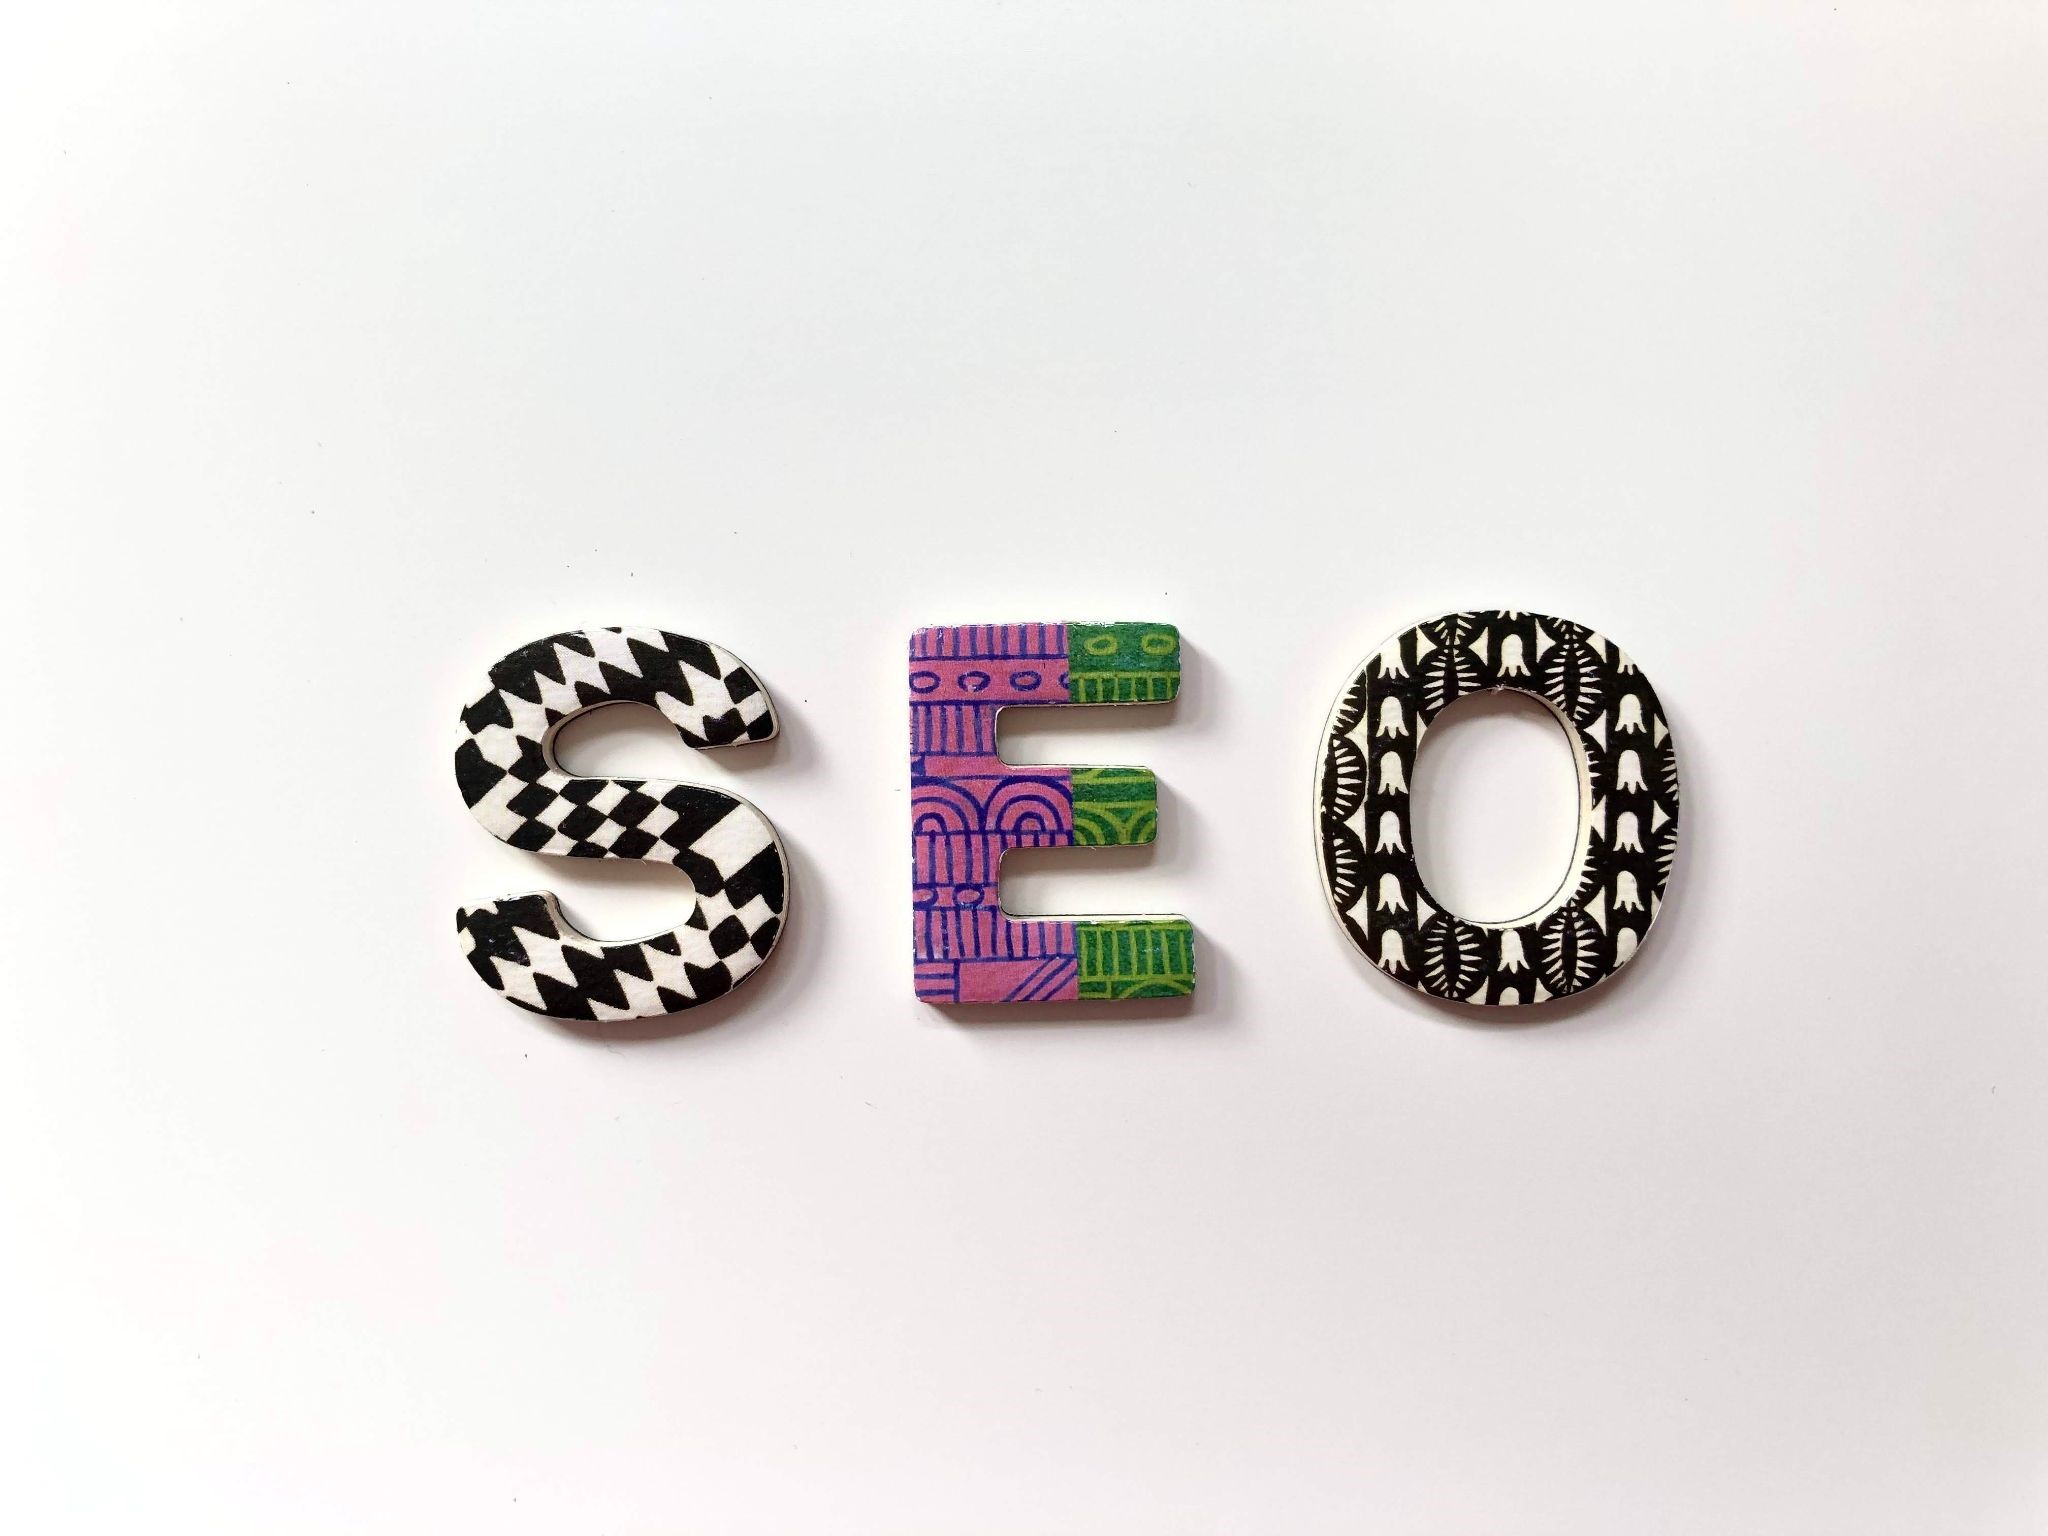 How SEO Is Important for Business